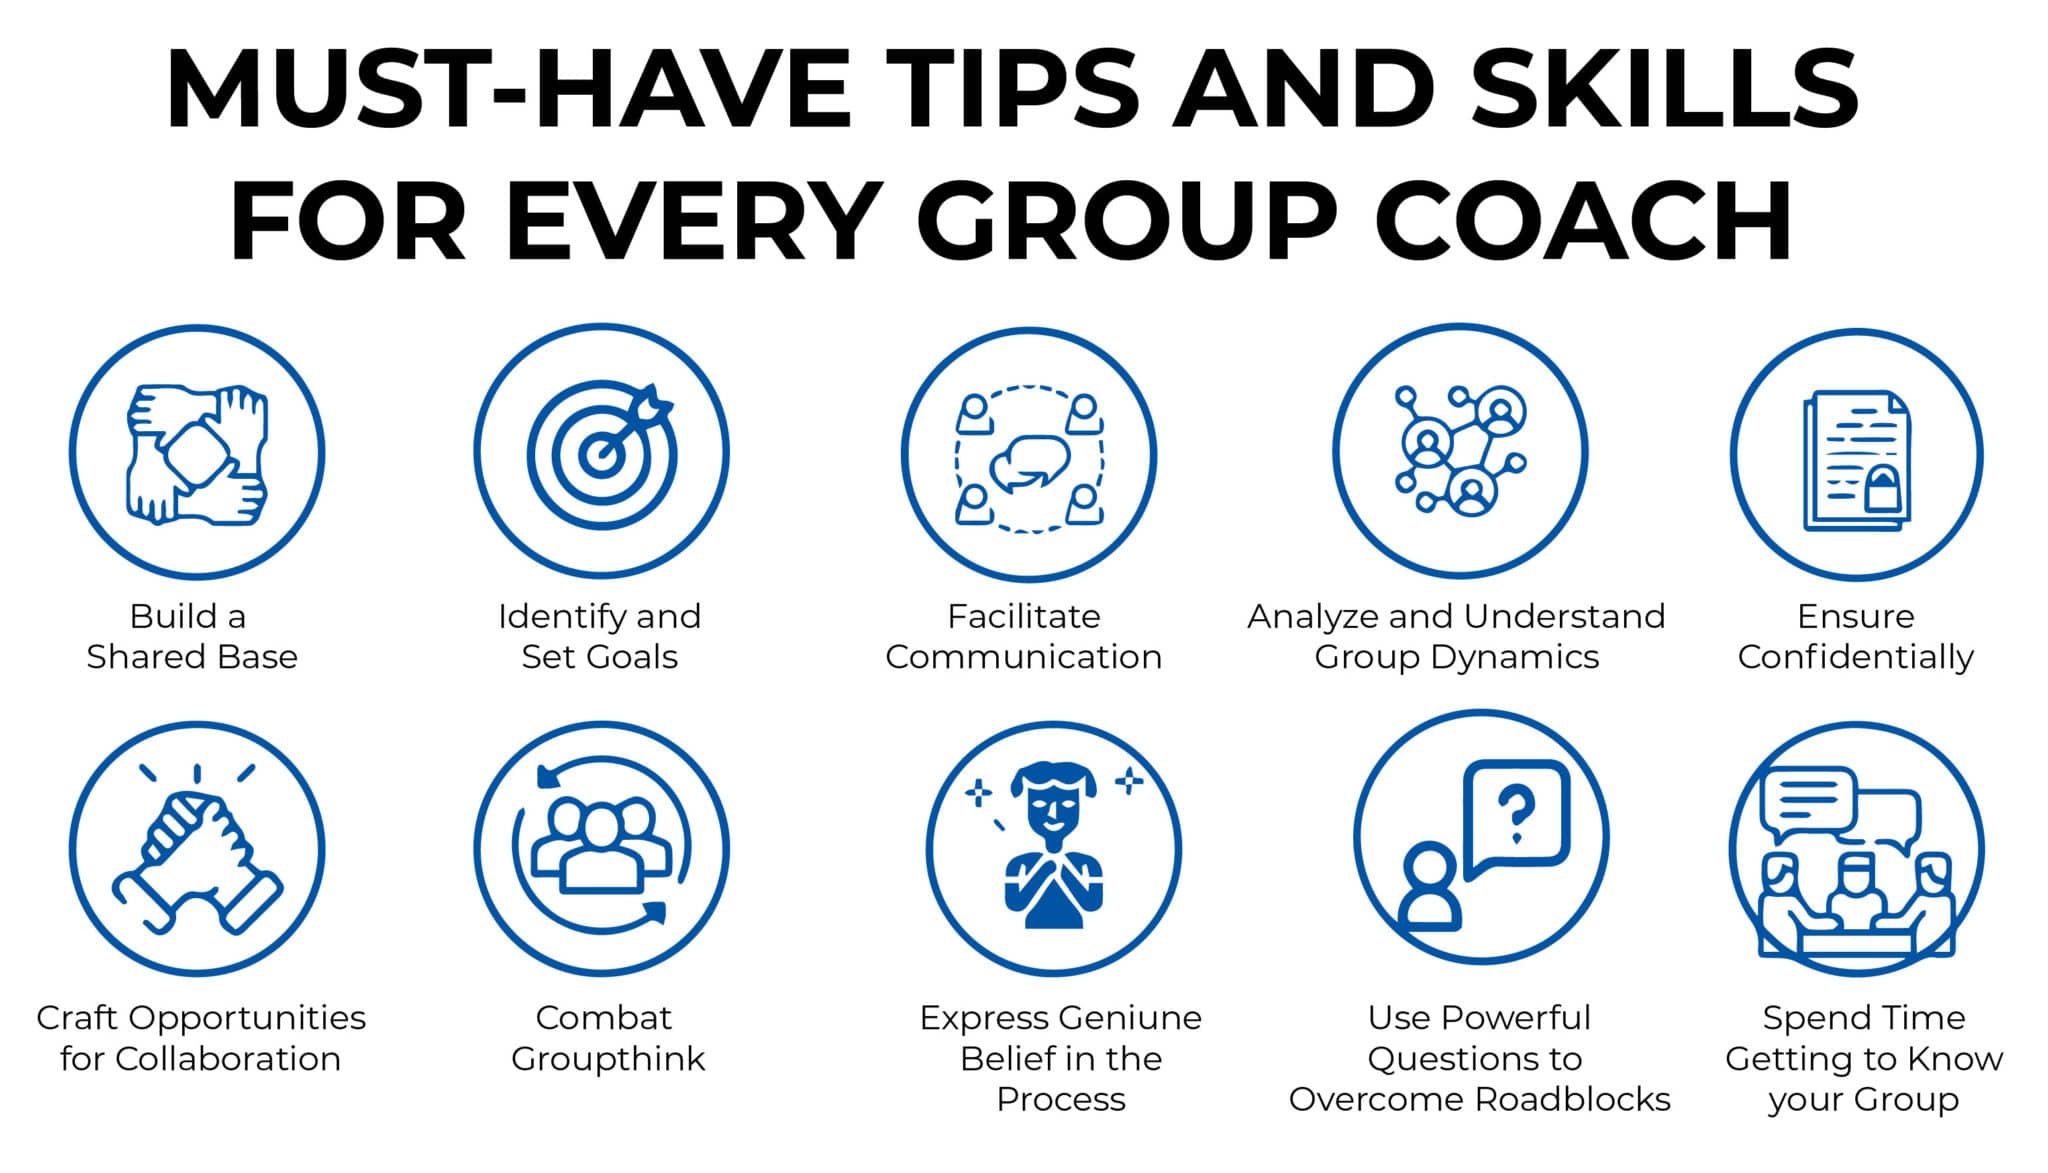 MUST-HAVE TIPS AND SKILLS FOR EVERY GROUP COACH